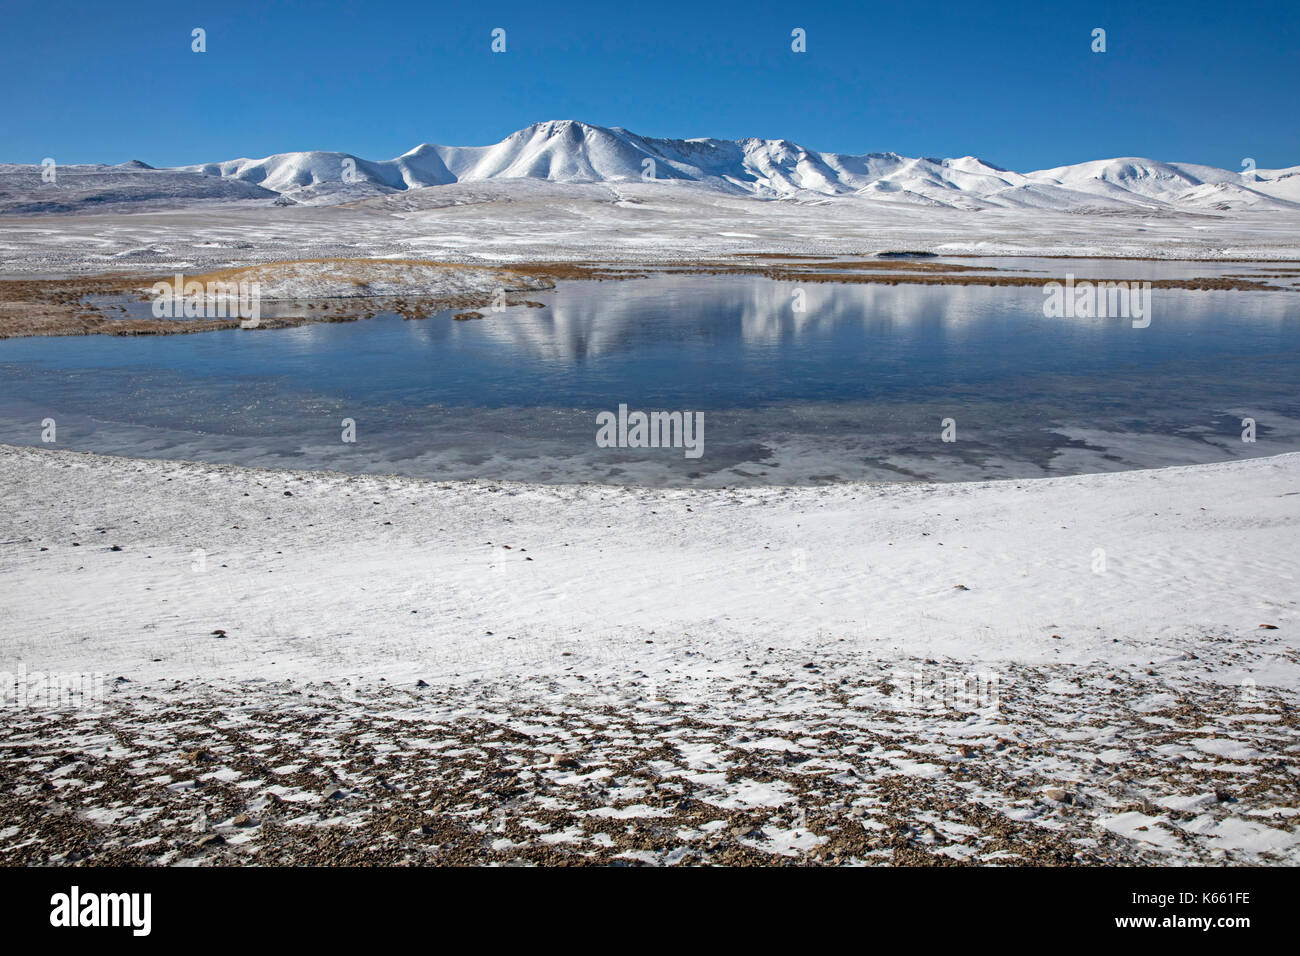 Lake, snow covered mountains and valley in the Tian Shan Mountains, Naryn Province, Kyrgyzstan Stock Photo